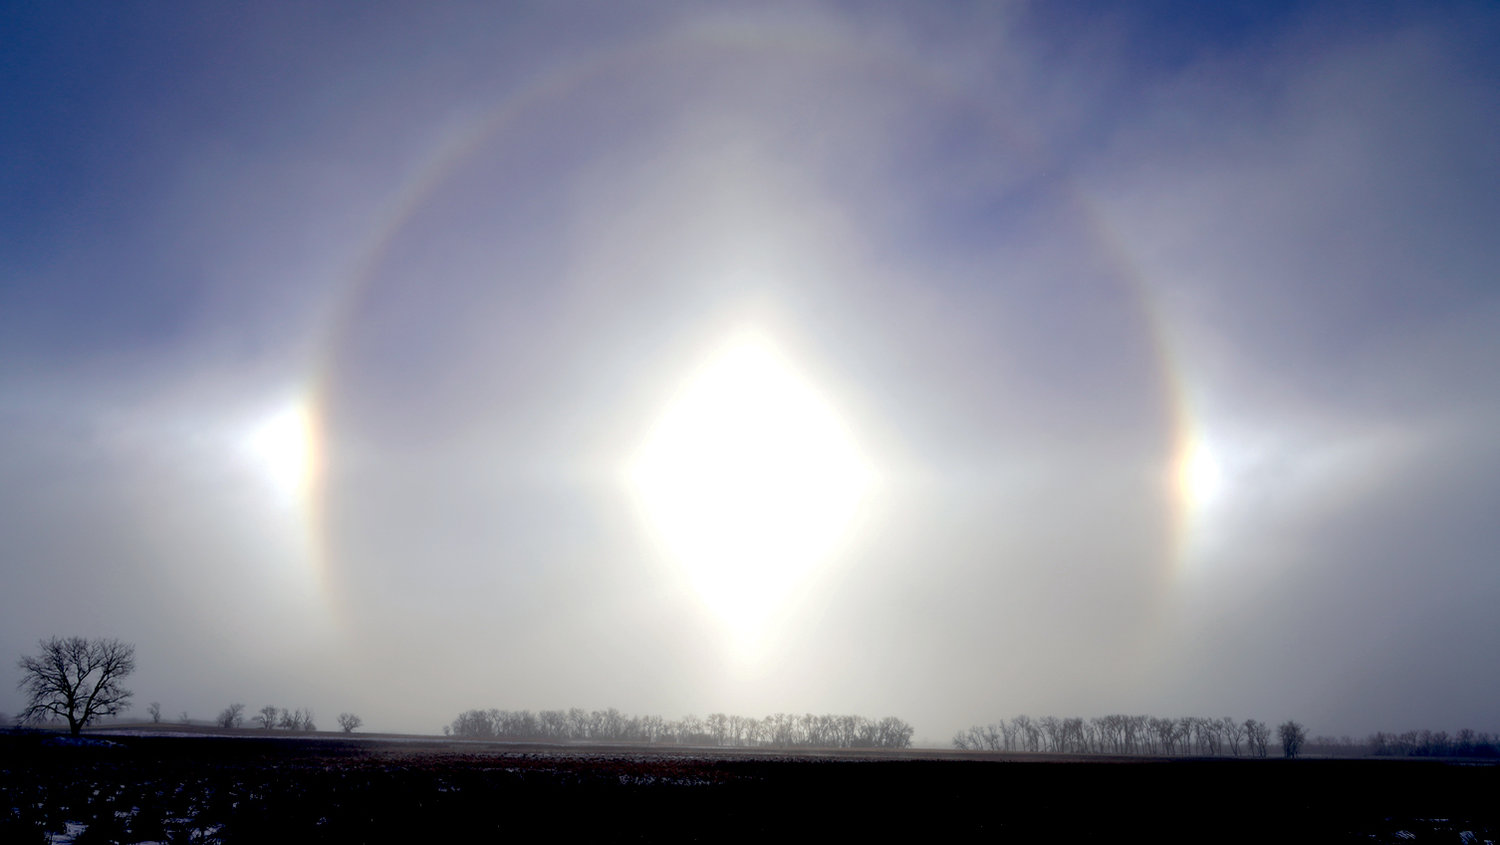 Sundogs, caused by the sun's refracting light through ice crystals in the atmosphere, are best seen when the sun is low on the horizon. This photograph was taken just north of De Smet off Highway 25 on Jan. 5 at 10 a.m., with an outside temperature at zero degrees and quite windy conditions.